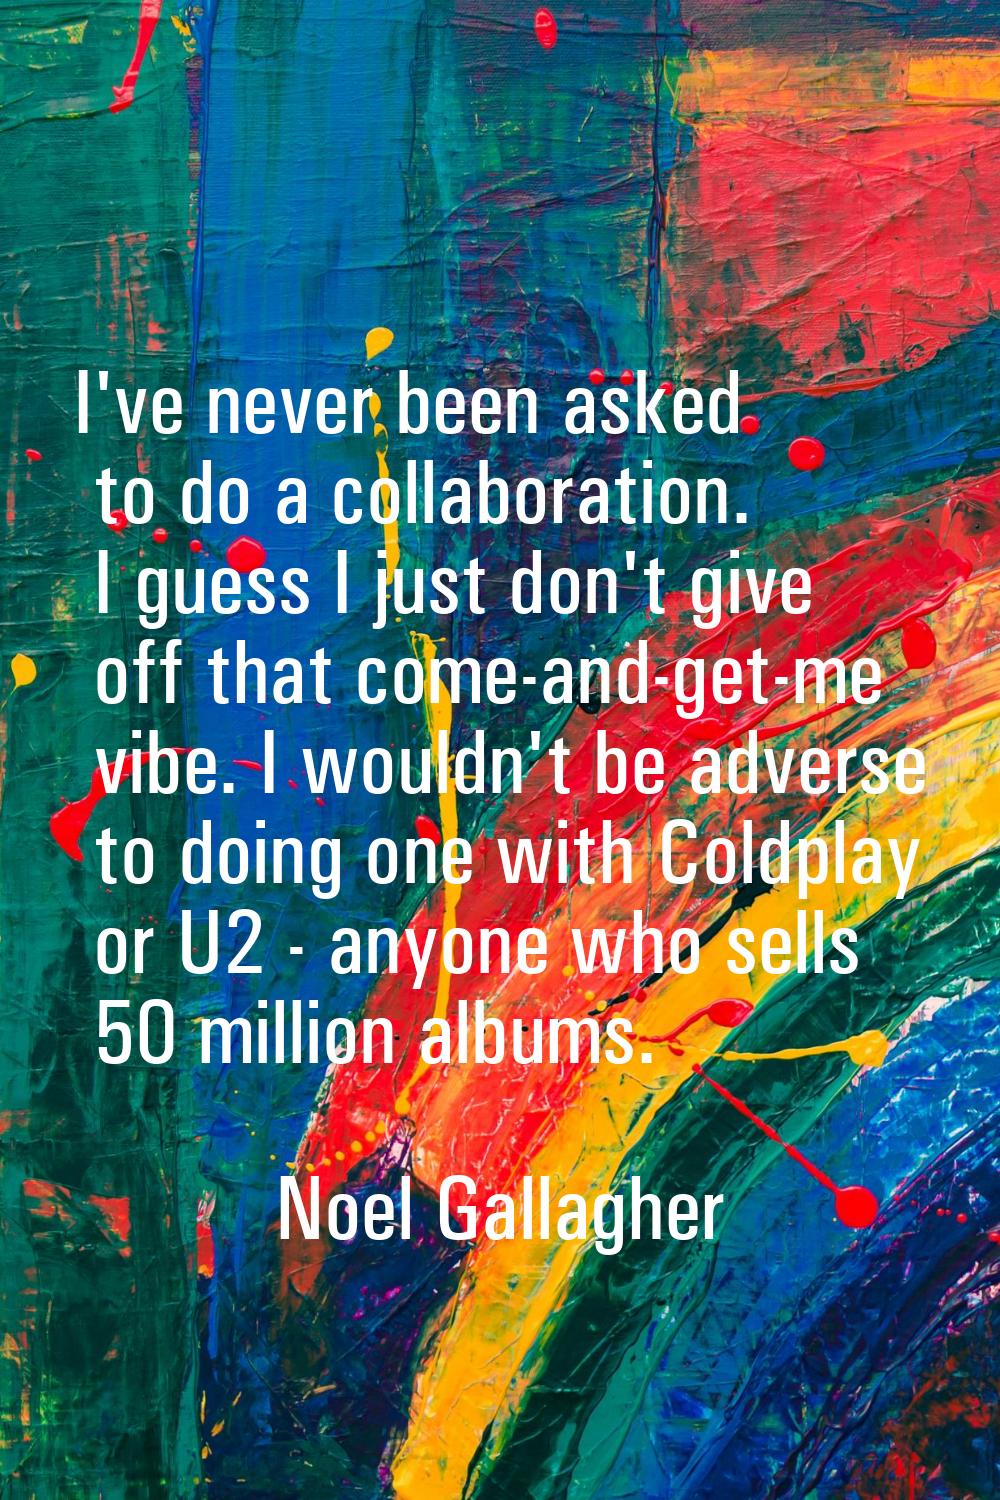 I've never been asked to do a collaboration. I guess I just don't give off that come-and-get-me vib